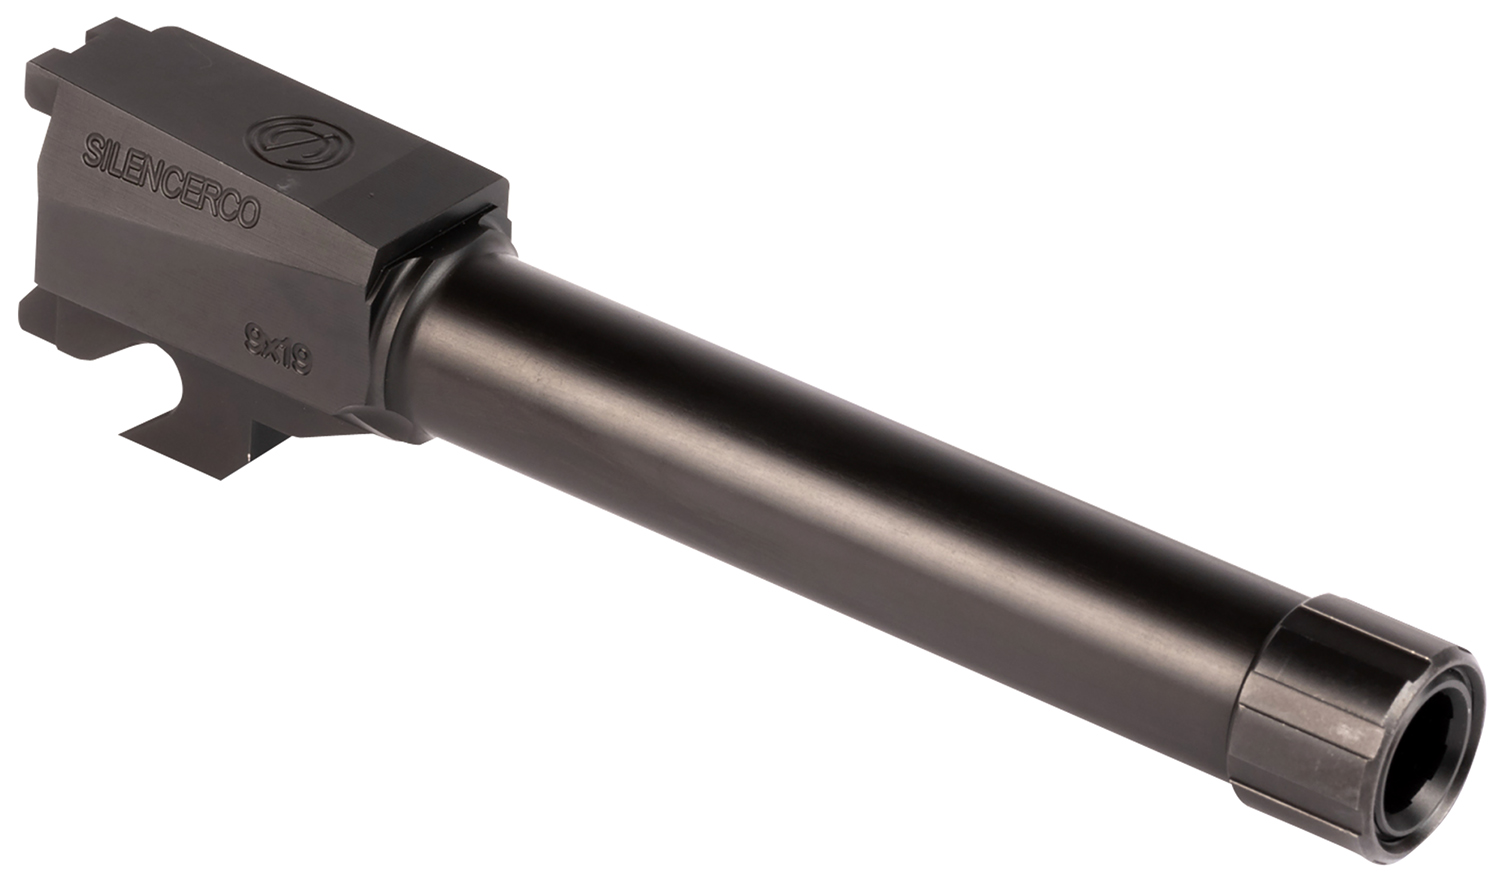 SilencerCo AC2486 Threaded Barrel 4.50" 9mm Luger, Black Nitride Stainless Steel, Fits Sig P320 Compact